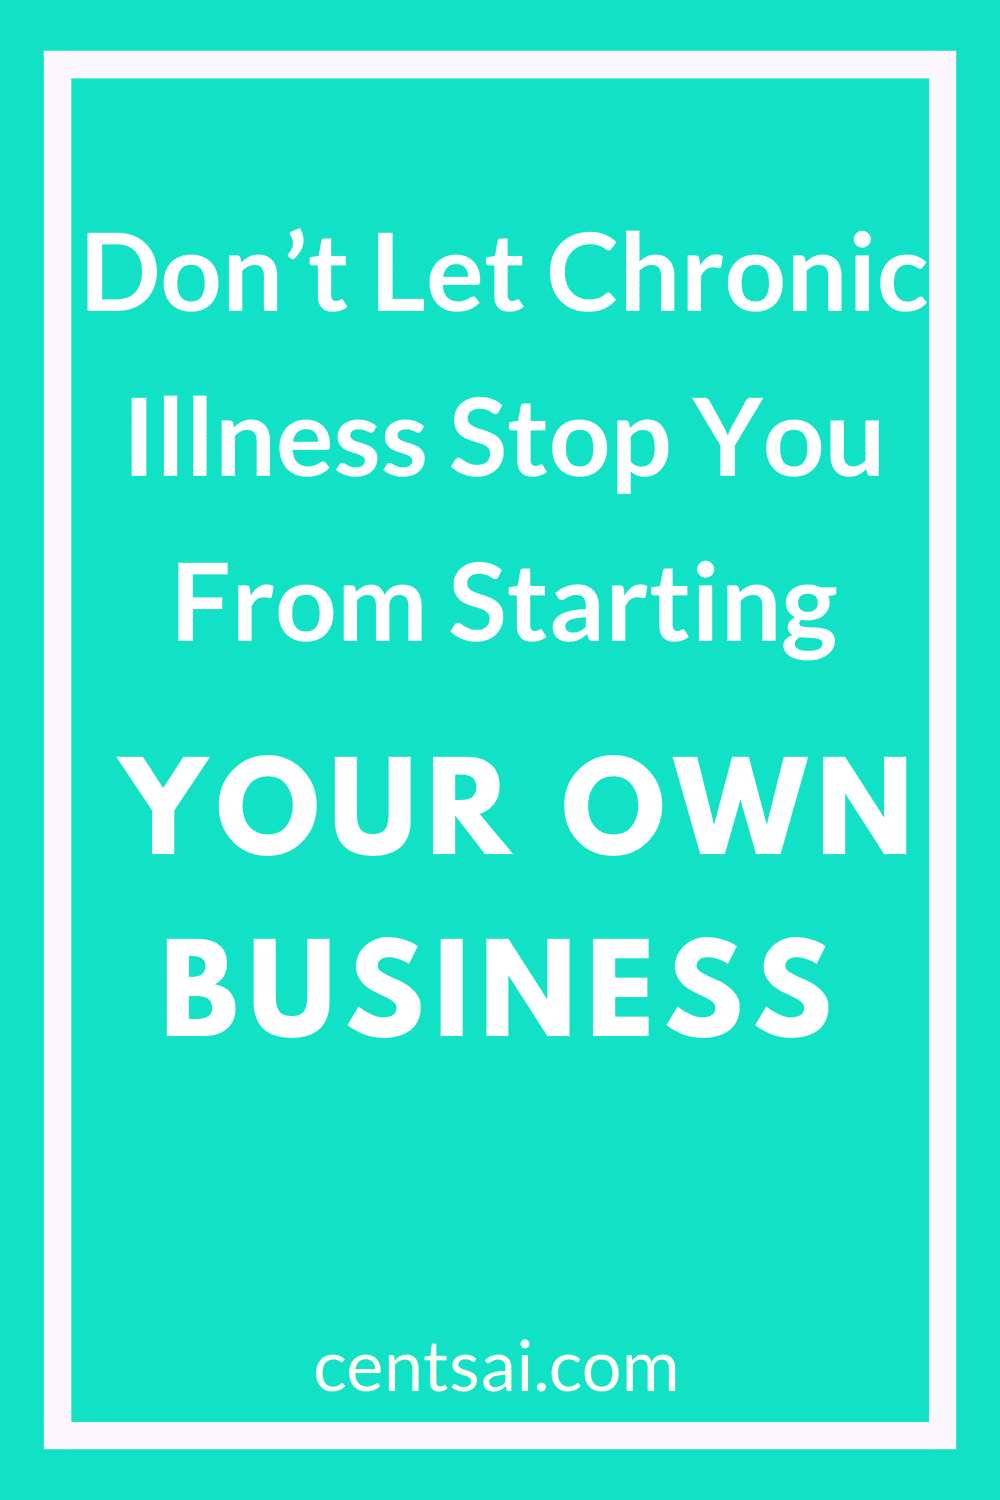 Don’t Let Chronic Illness Stop You From Starting Your Own Business. One entrepreneur battling Crohn's disease shares his advice for starting your own business and make extra money idea while dealing with chronic illness. #ownbusiness #makemoneyfast #extramoneyideas